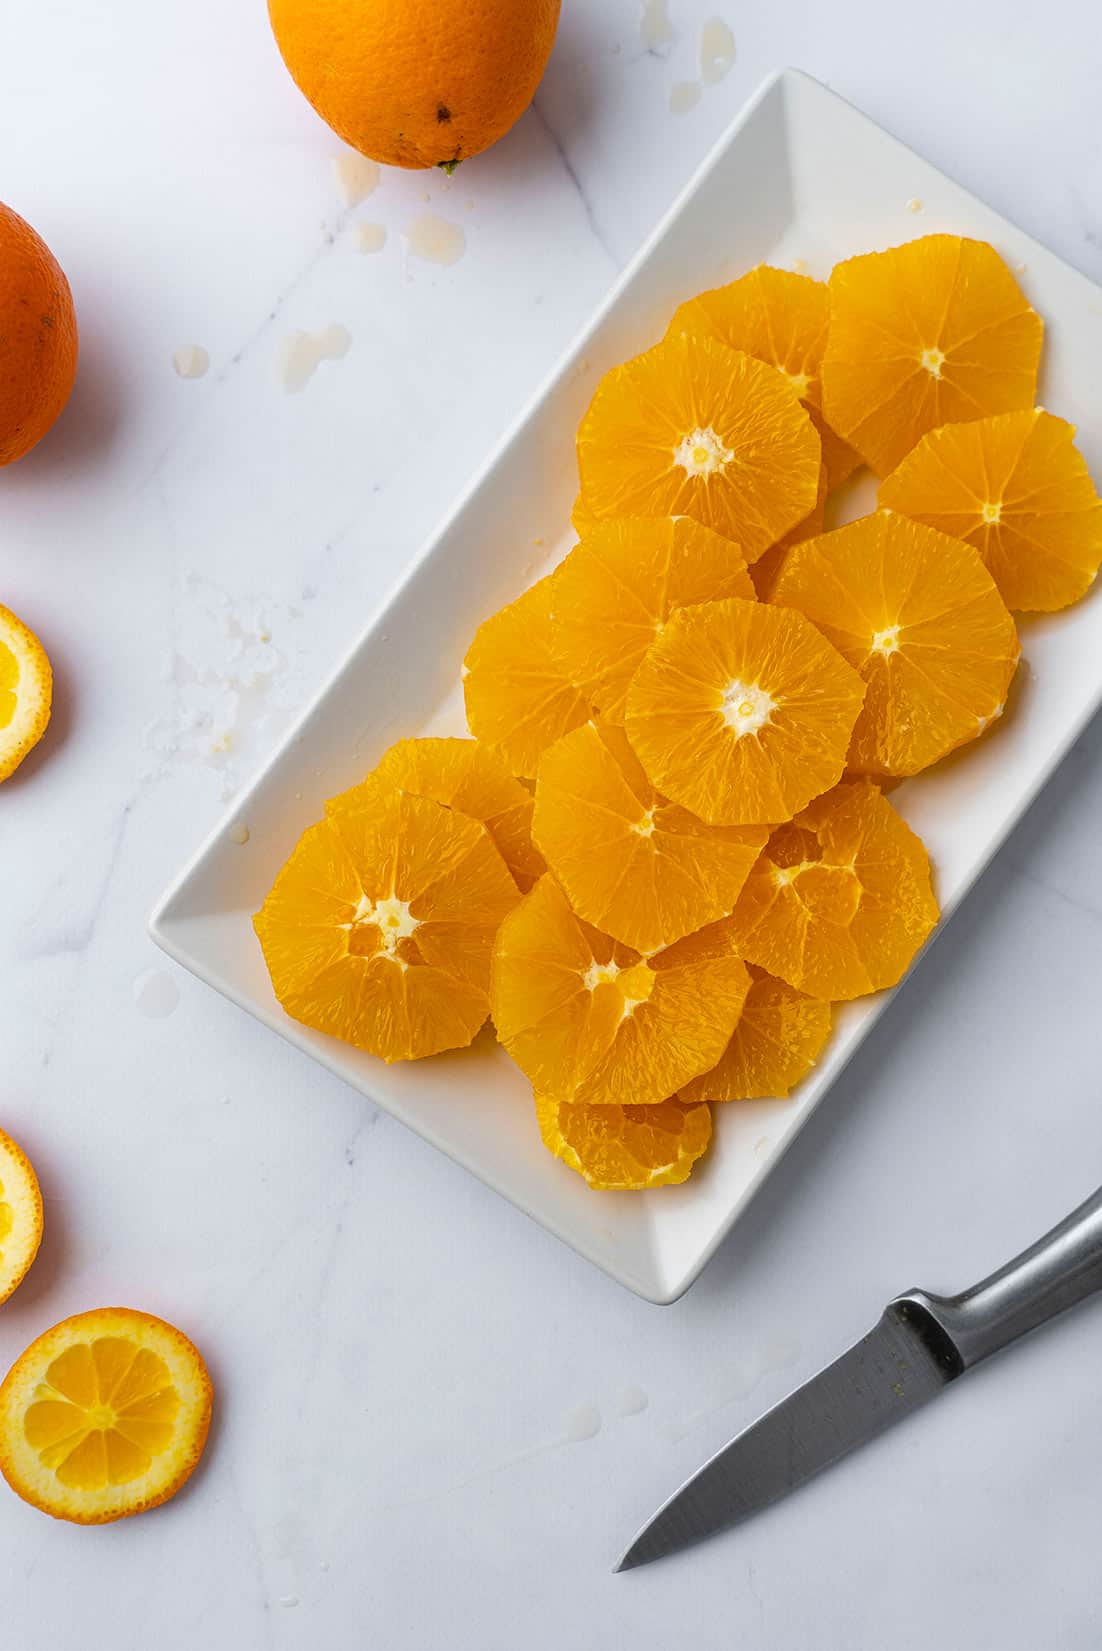 orange slices on white plate with knife 